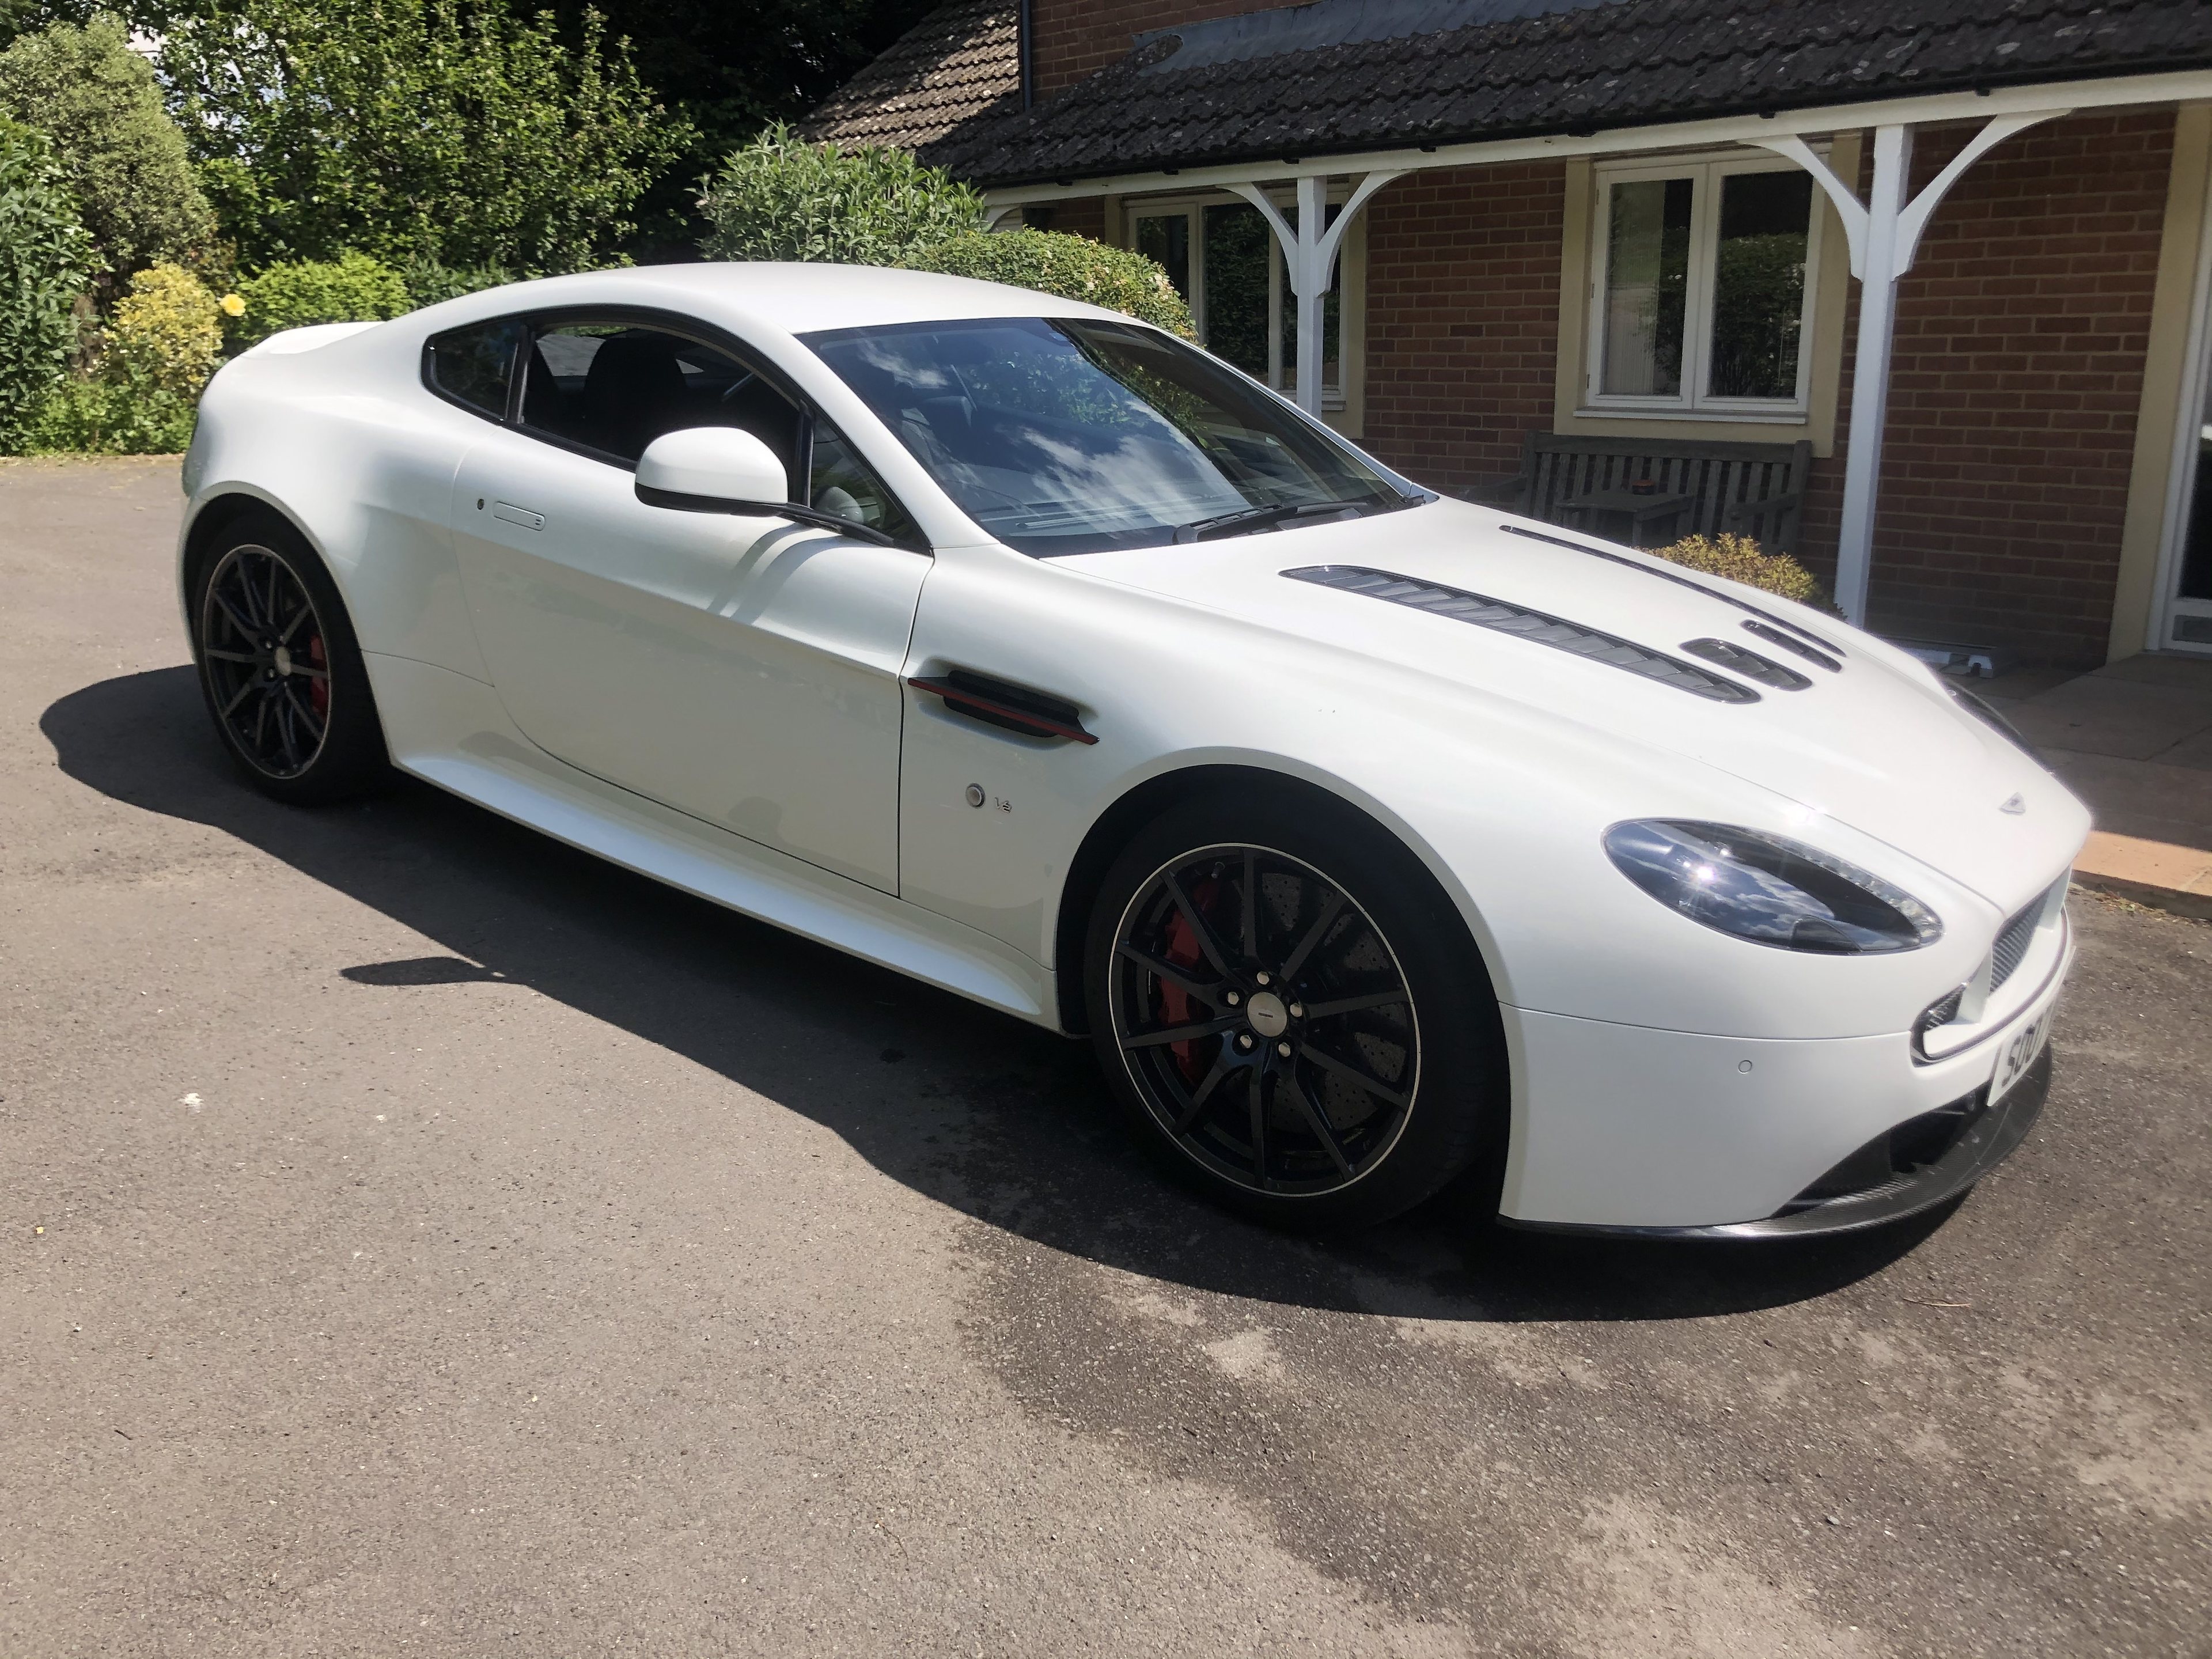 So what have you done with your Aston today? (Vol. 2) - Page 30 - Aston Martin - PistonHeads